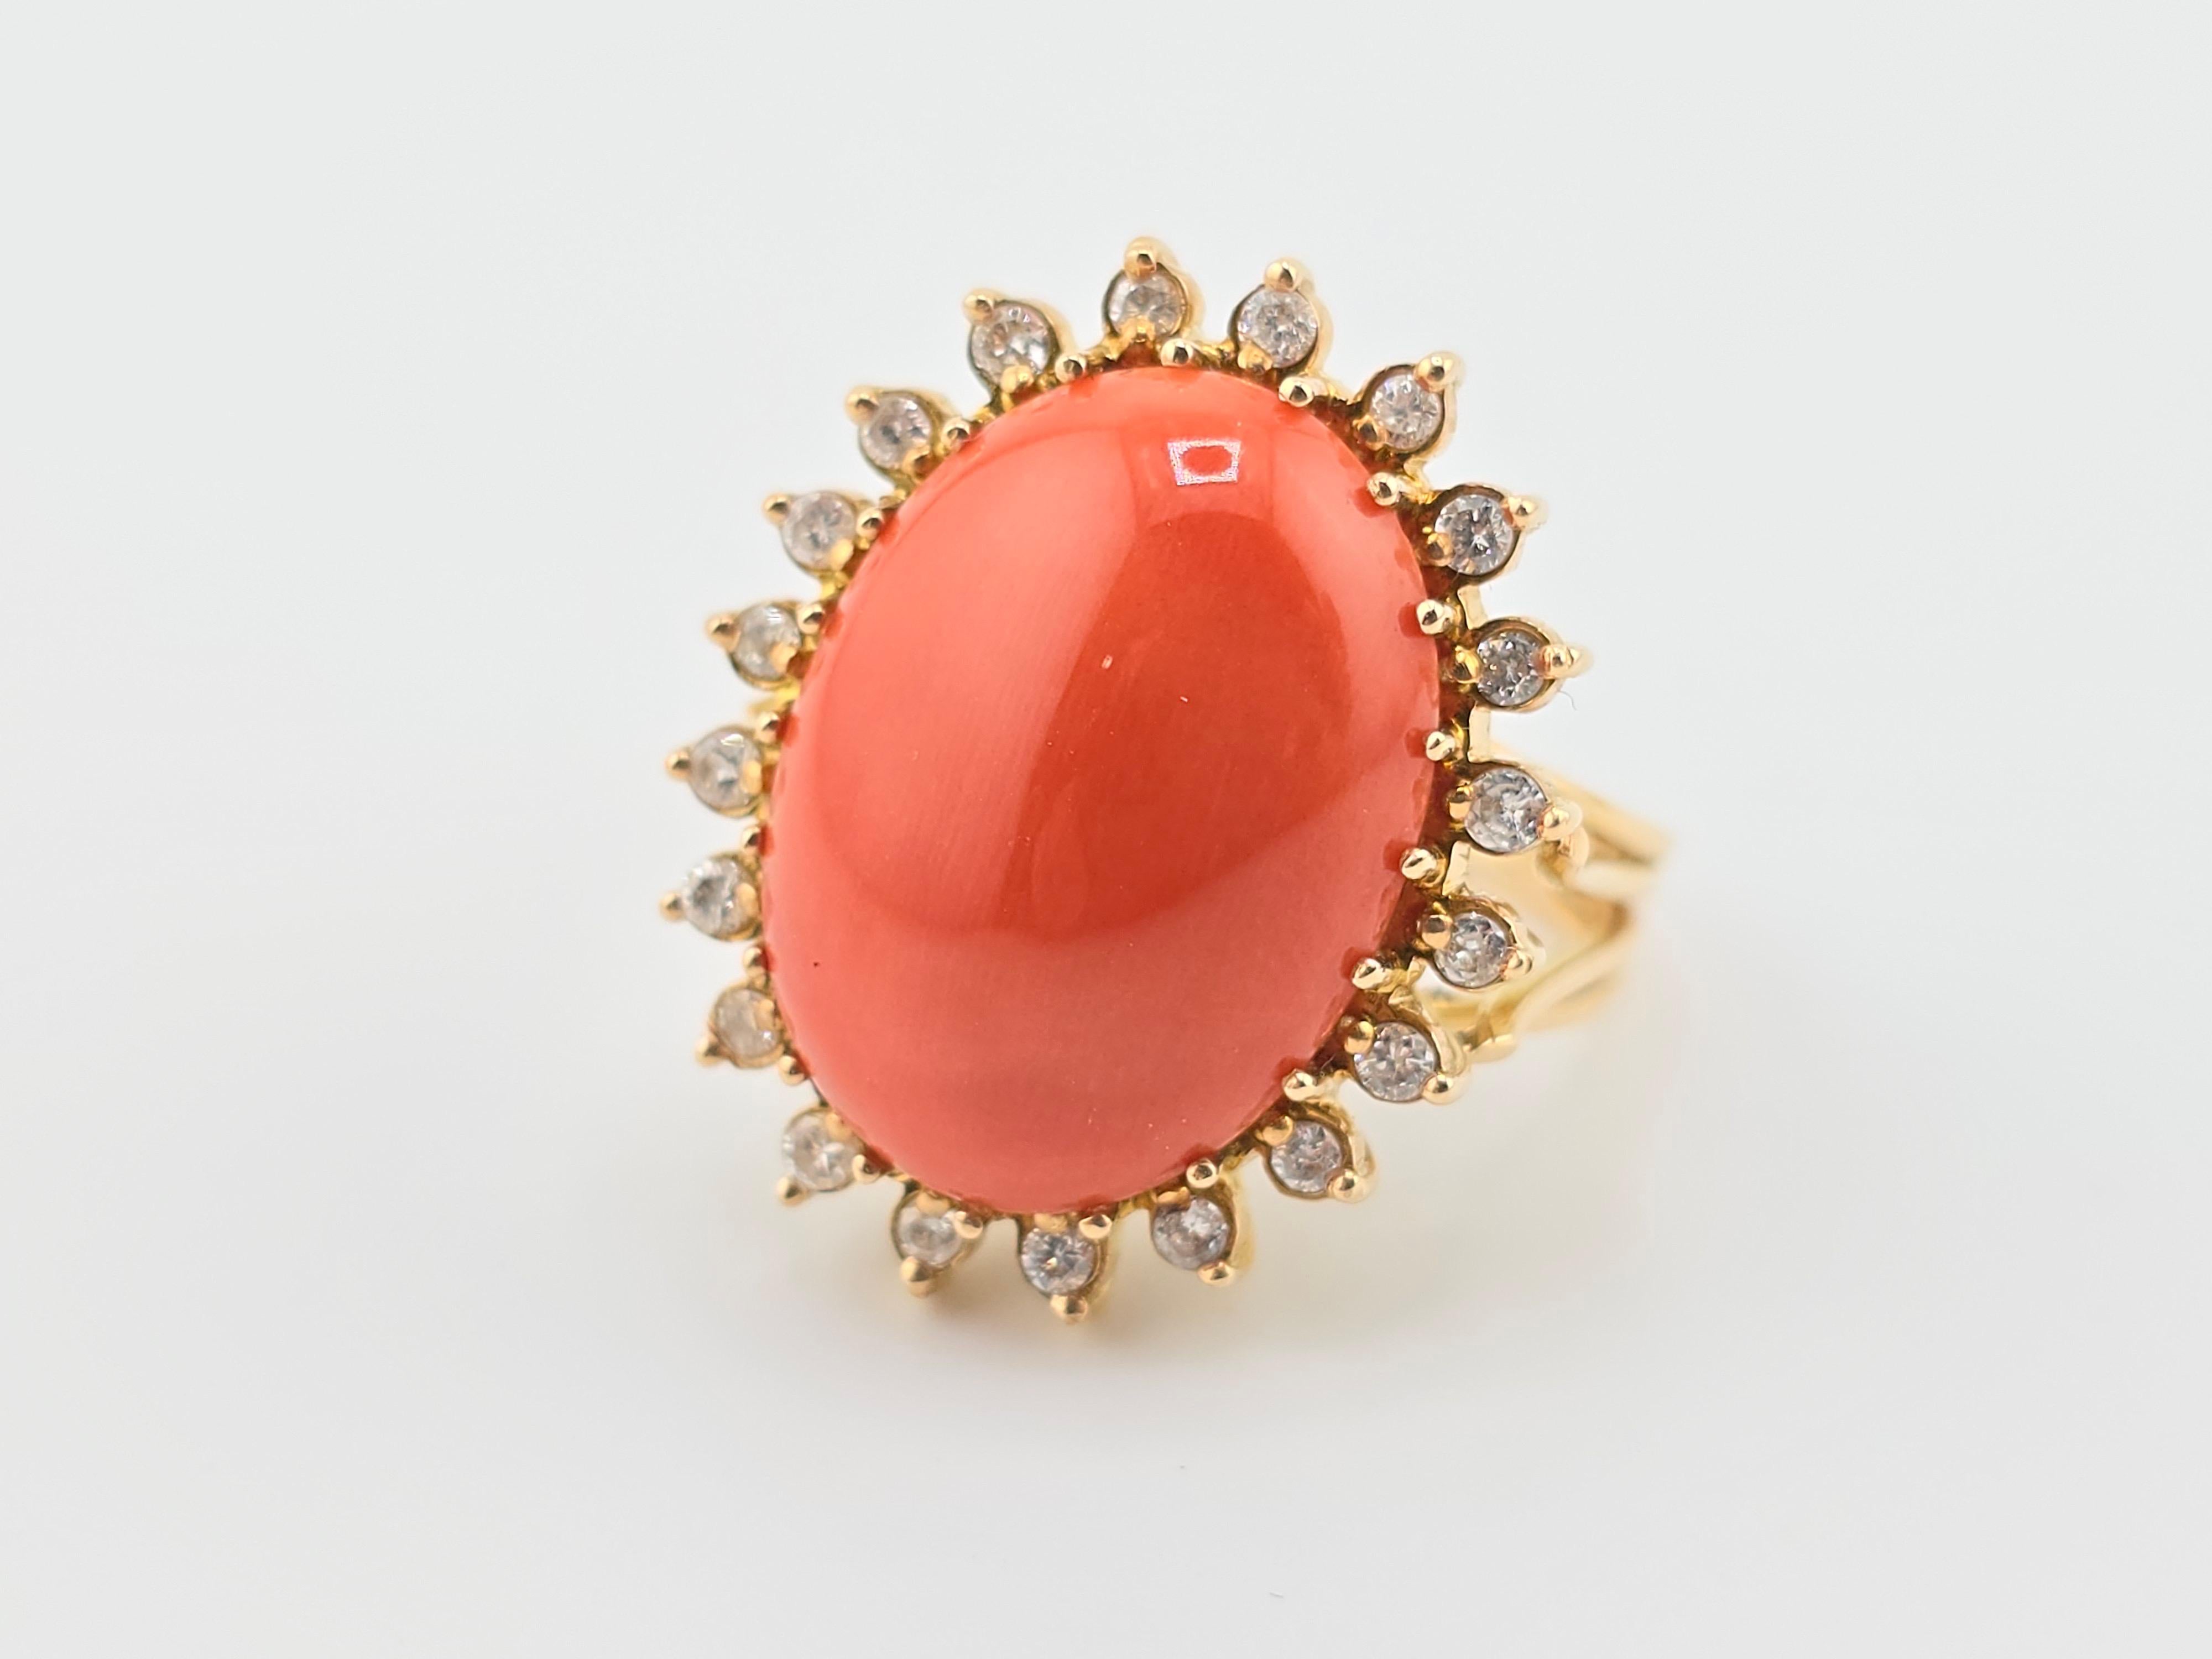 This is an exceptional, gorgeous Italian momo coral gold ring. It is surrounded with many diamonds to give it even more of a gorgeous sparkle. The color of the coral is natural and has not been dyed or processed like many other corals in the market.